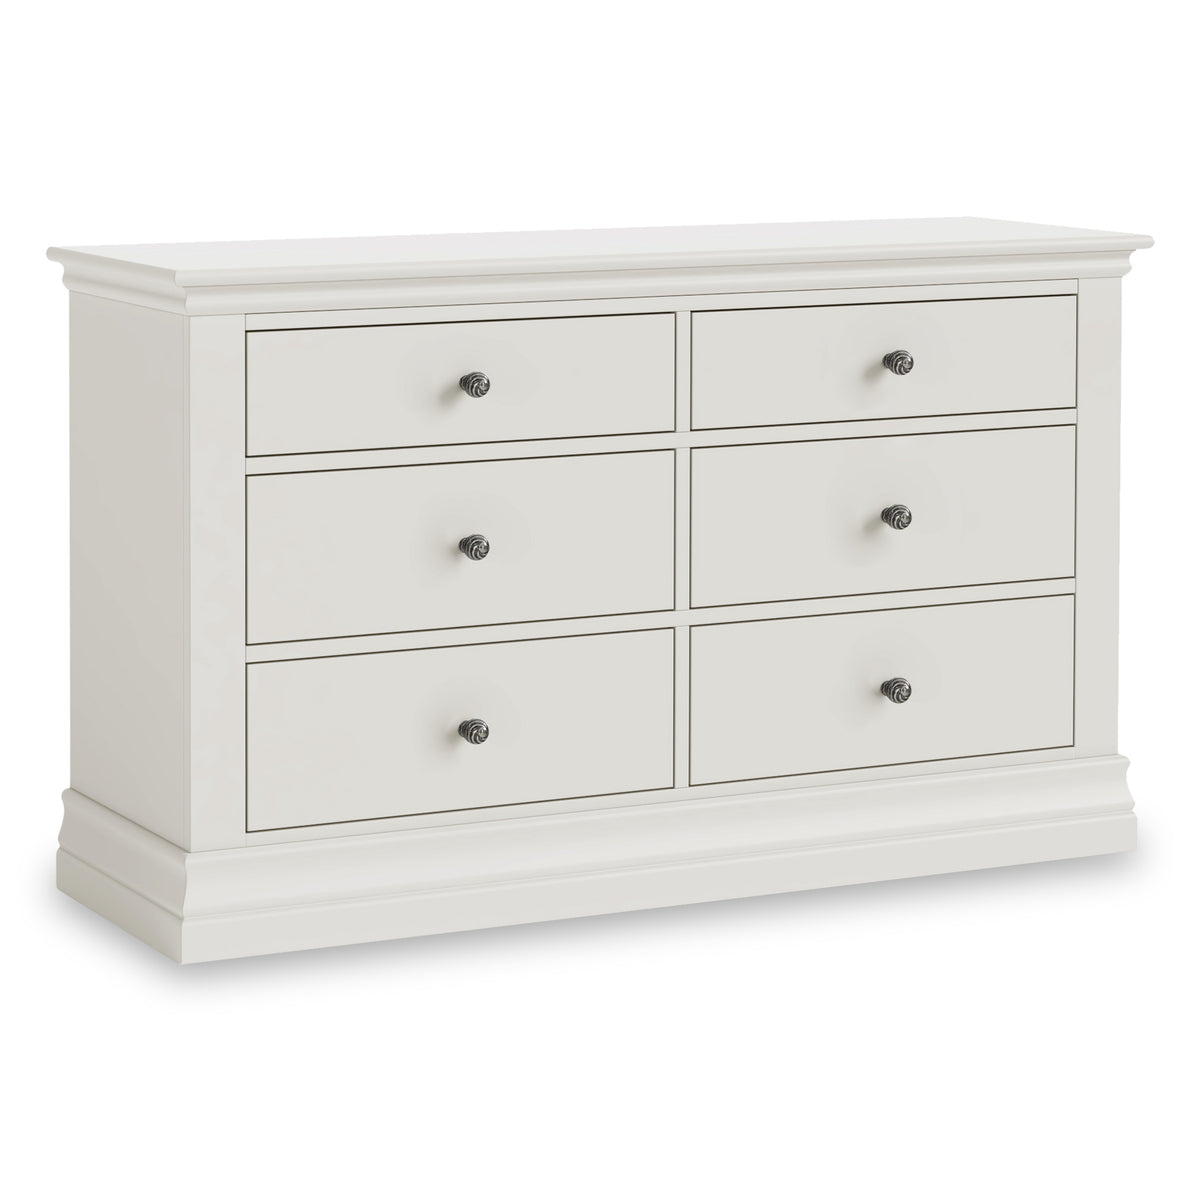 Porter Grey 6 Drawer Wide Chest from Roseland Furniture